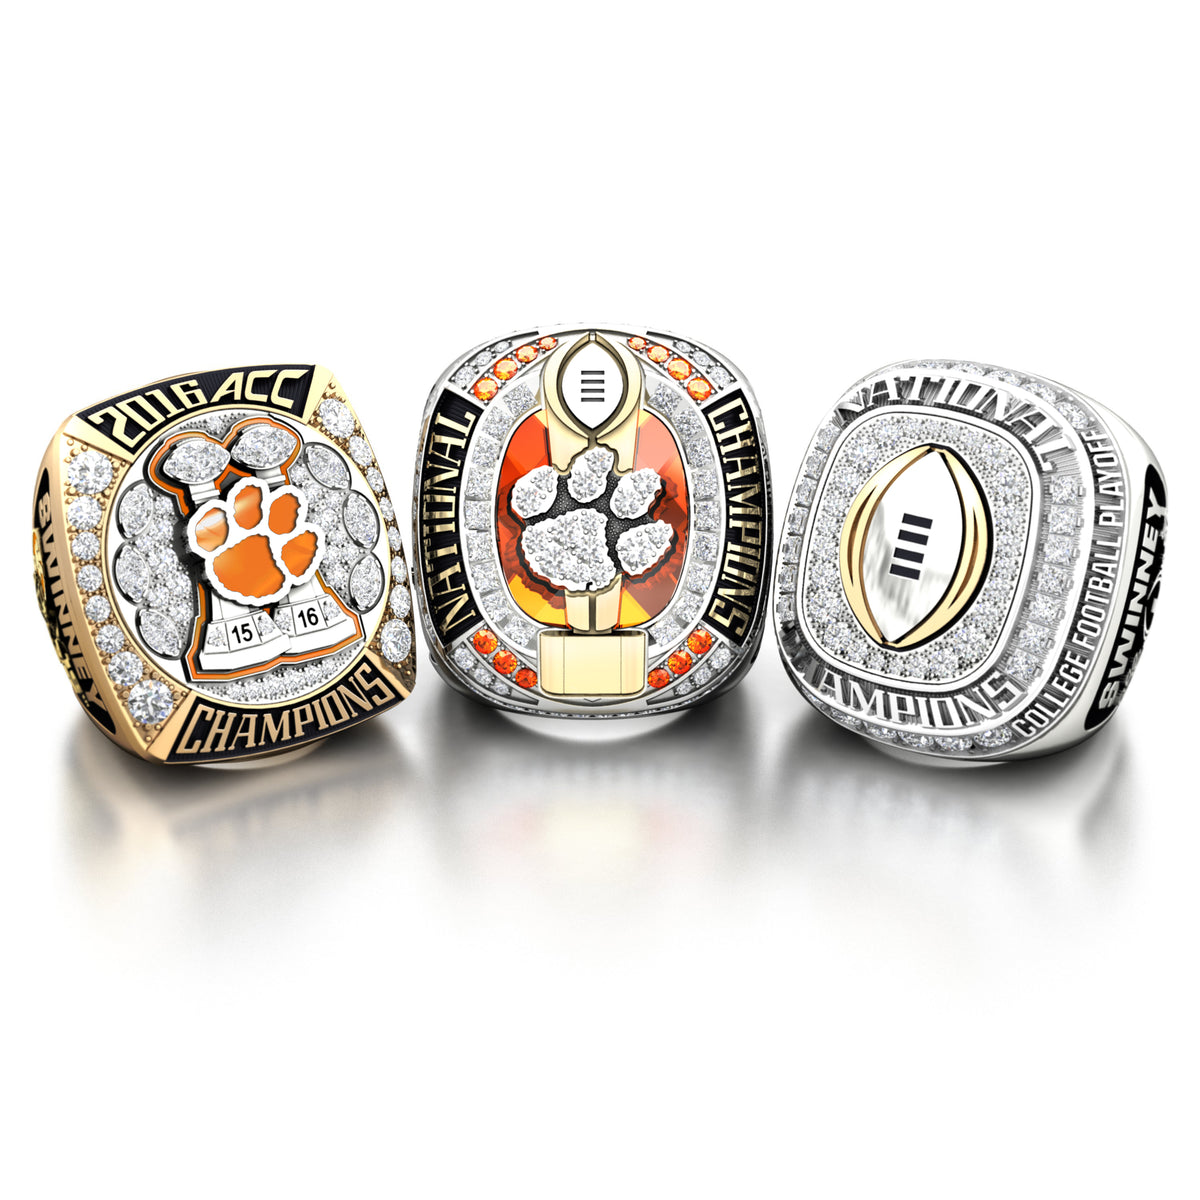 Championship Rings For Sale By Supercoach Champion. Large Selection Of